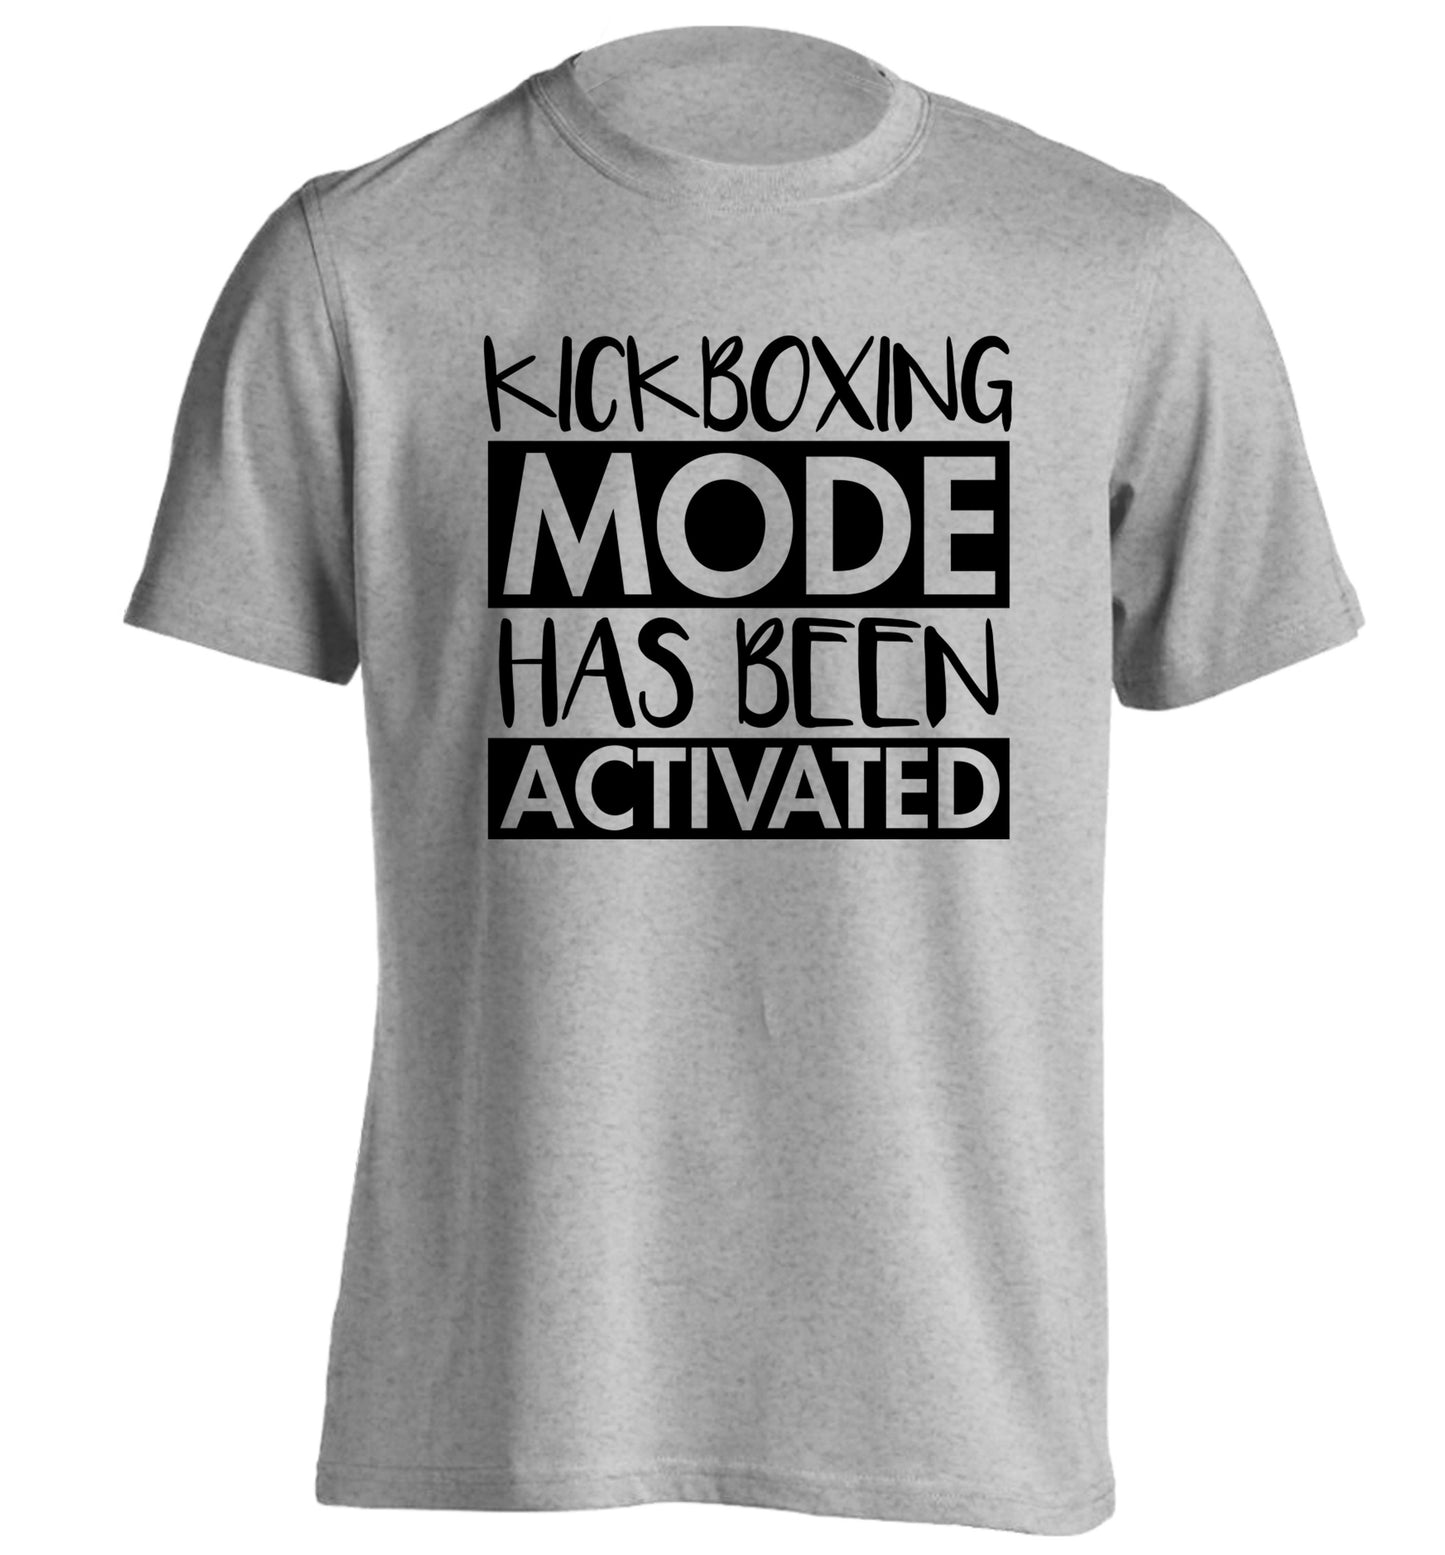 Kickboxing mode activated adults unisex grey Tshirt 2XL